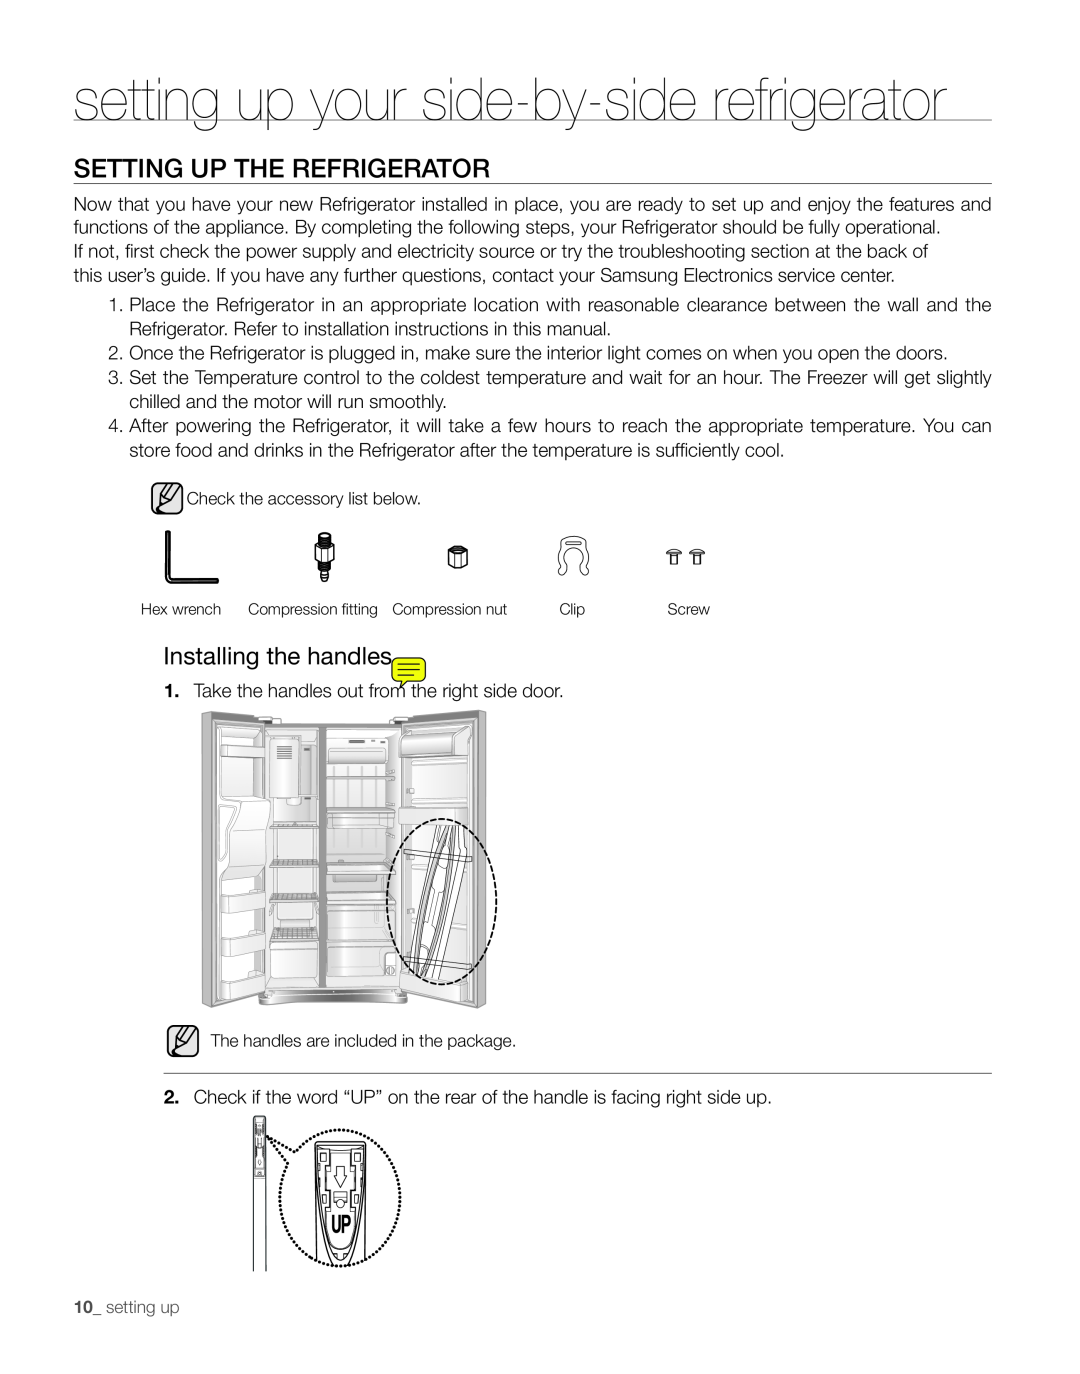 Samsung RS261M** user manual SETTING UP the refrigerator, Installing the handles, setting up your side-by-side refrigerator 